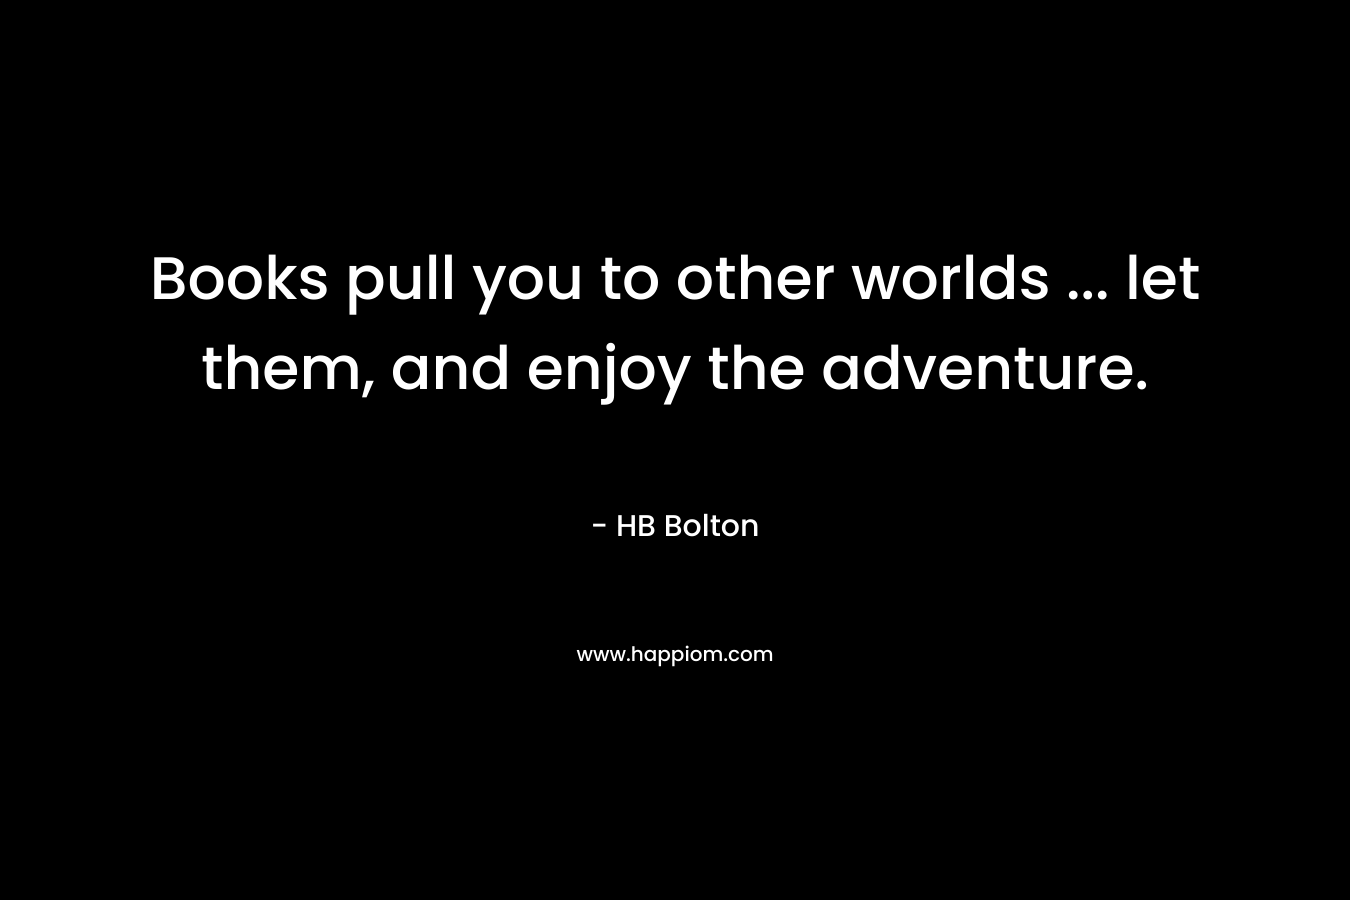 Books pull you to other worlds ... let them, and enjoy the adventure.